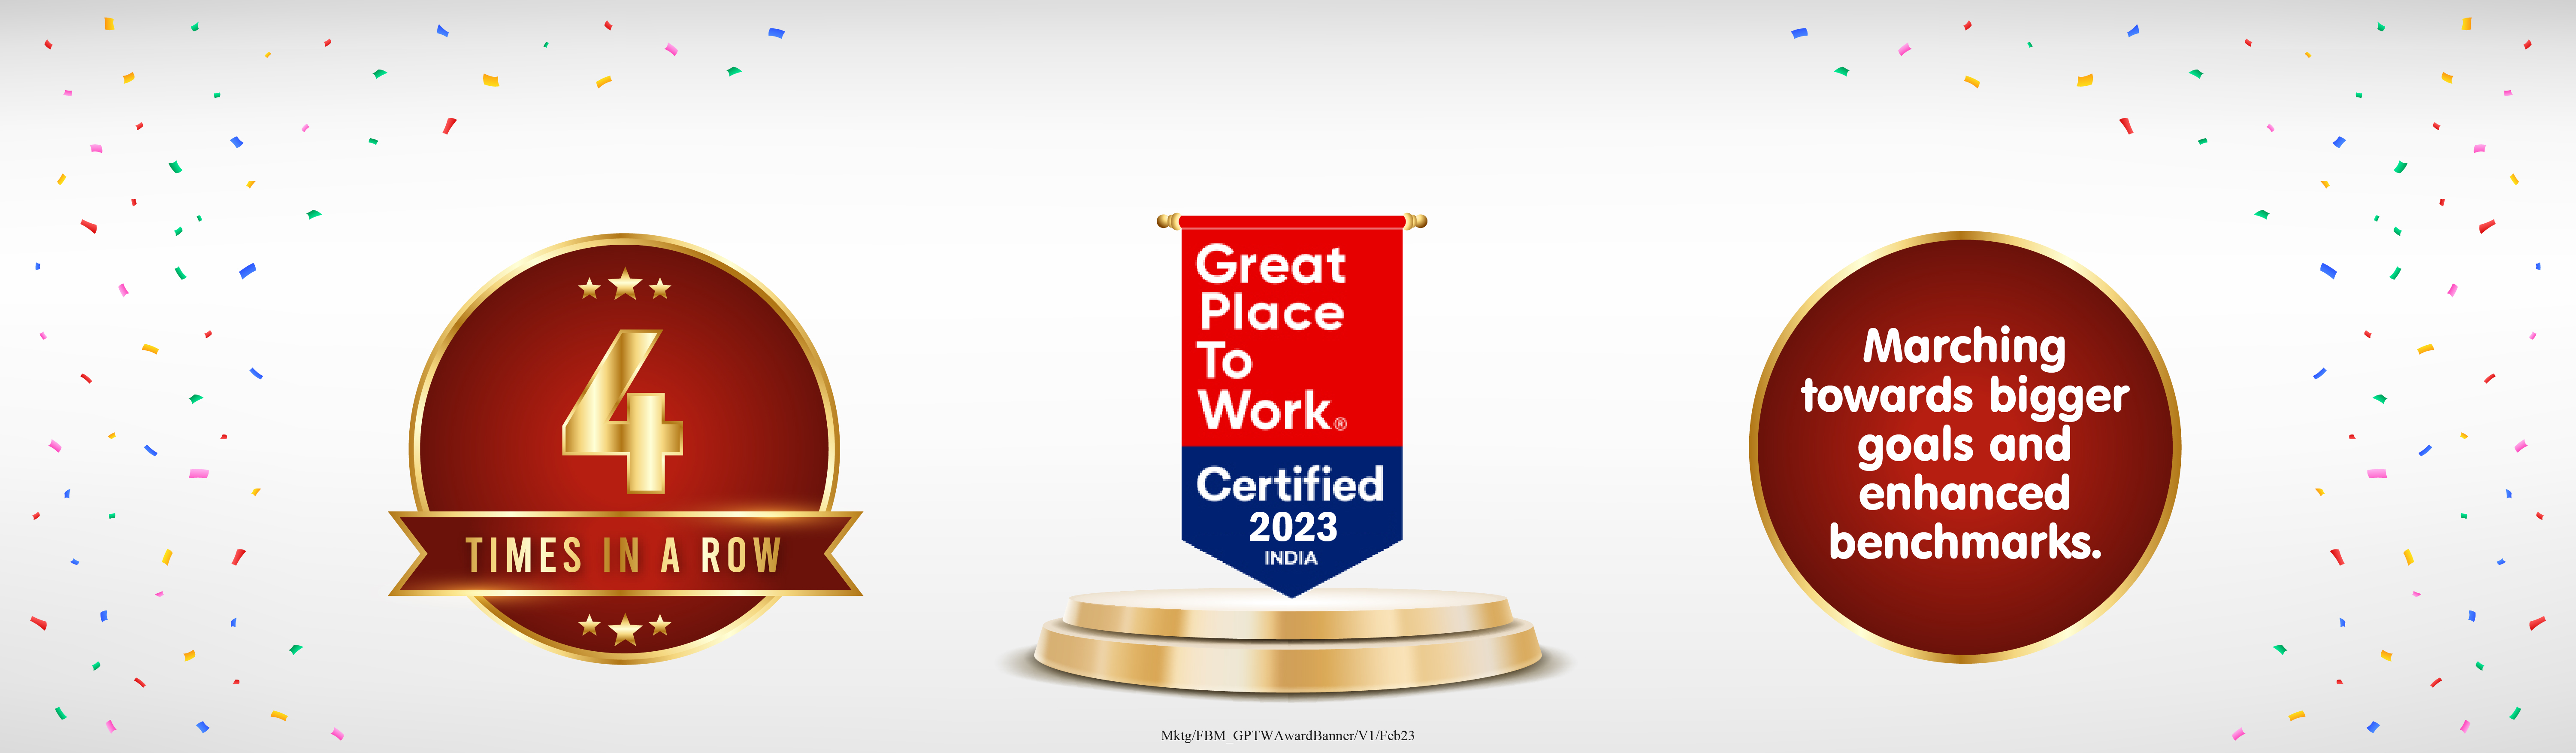 Great Place To Work Certified Badge